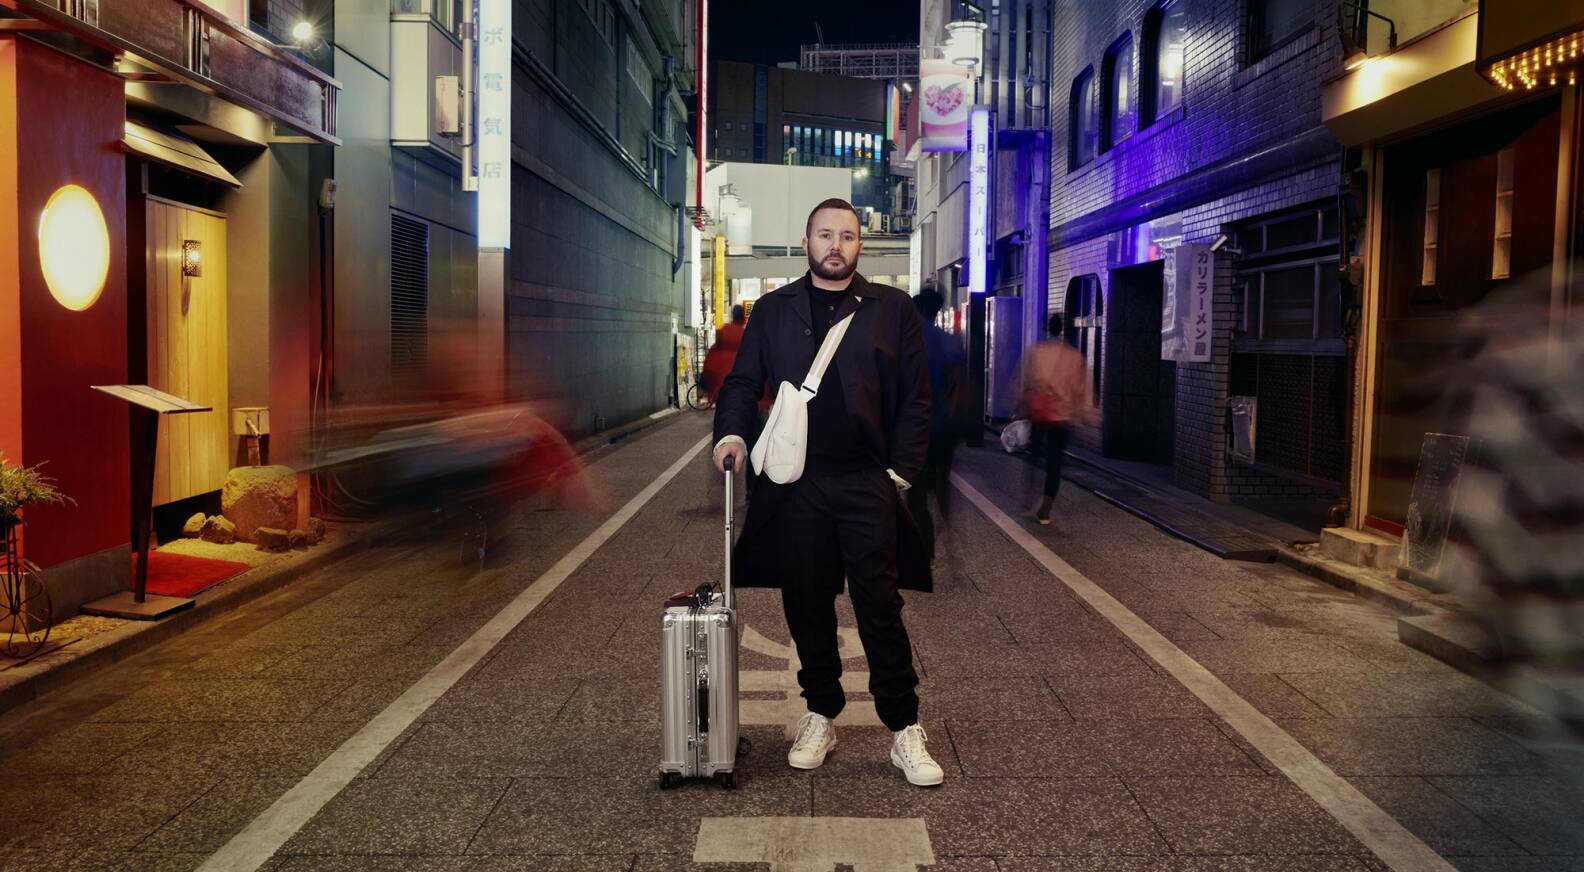 RIMOWA continues purposeful journey with “Never Still” campaign - LVMH